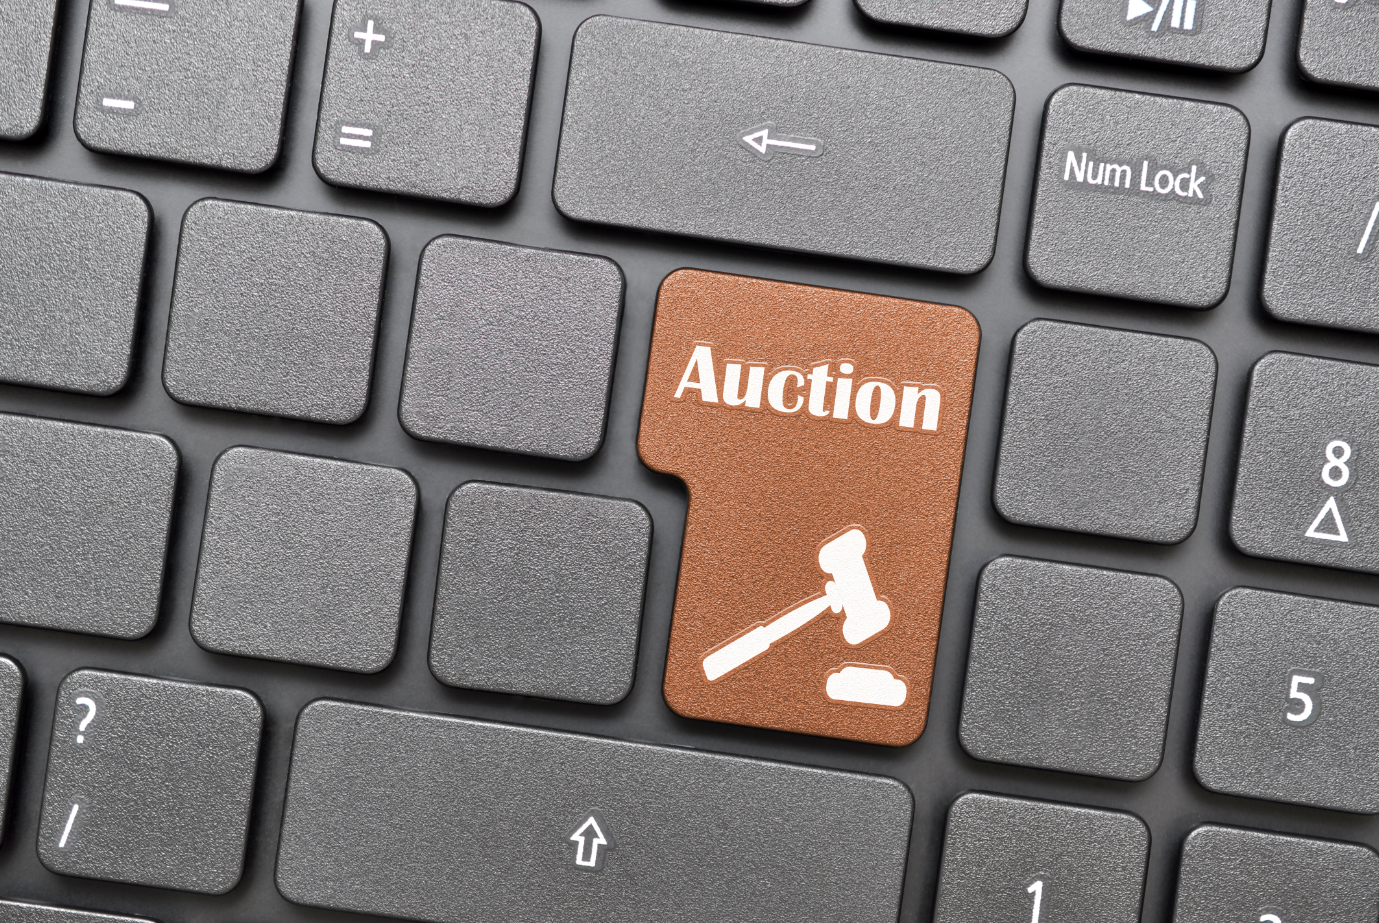 How to Build an Auction Website or System: Relevant Software’s Guide